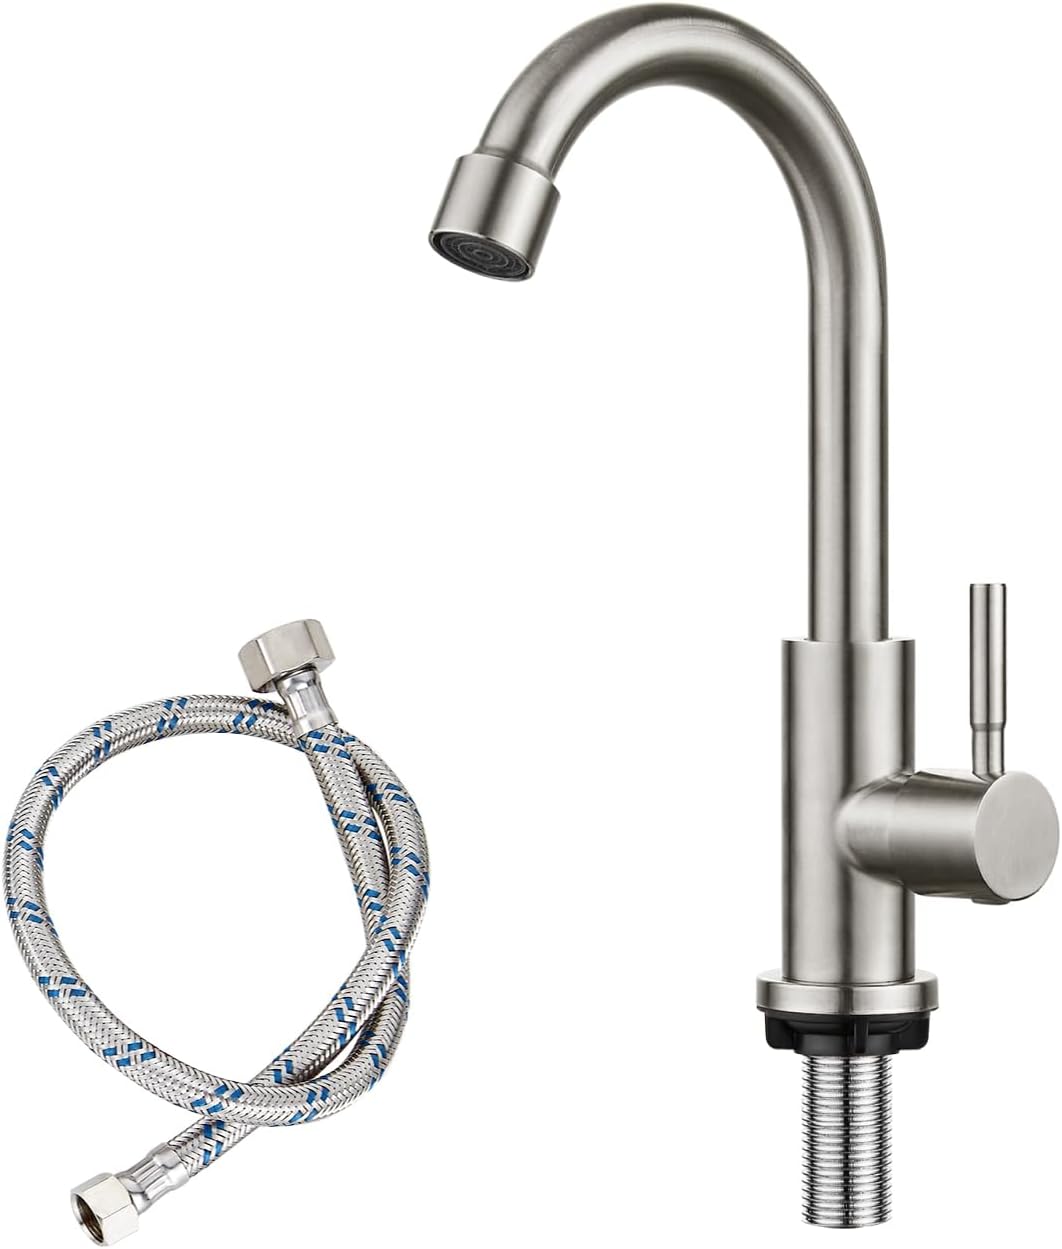 Cold Water Only Kitchen Faucet Single Handle 1 Hole 360 Degree Swivel Spout Deck Mount SUS304 Stainless Steel Sink Bar Tap Goose Neck(Drain Not Included),8.3inch, Brushed Nickel